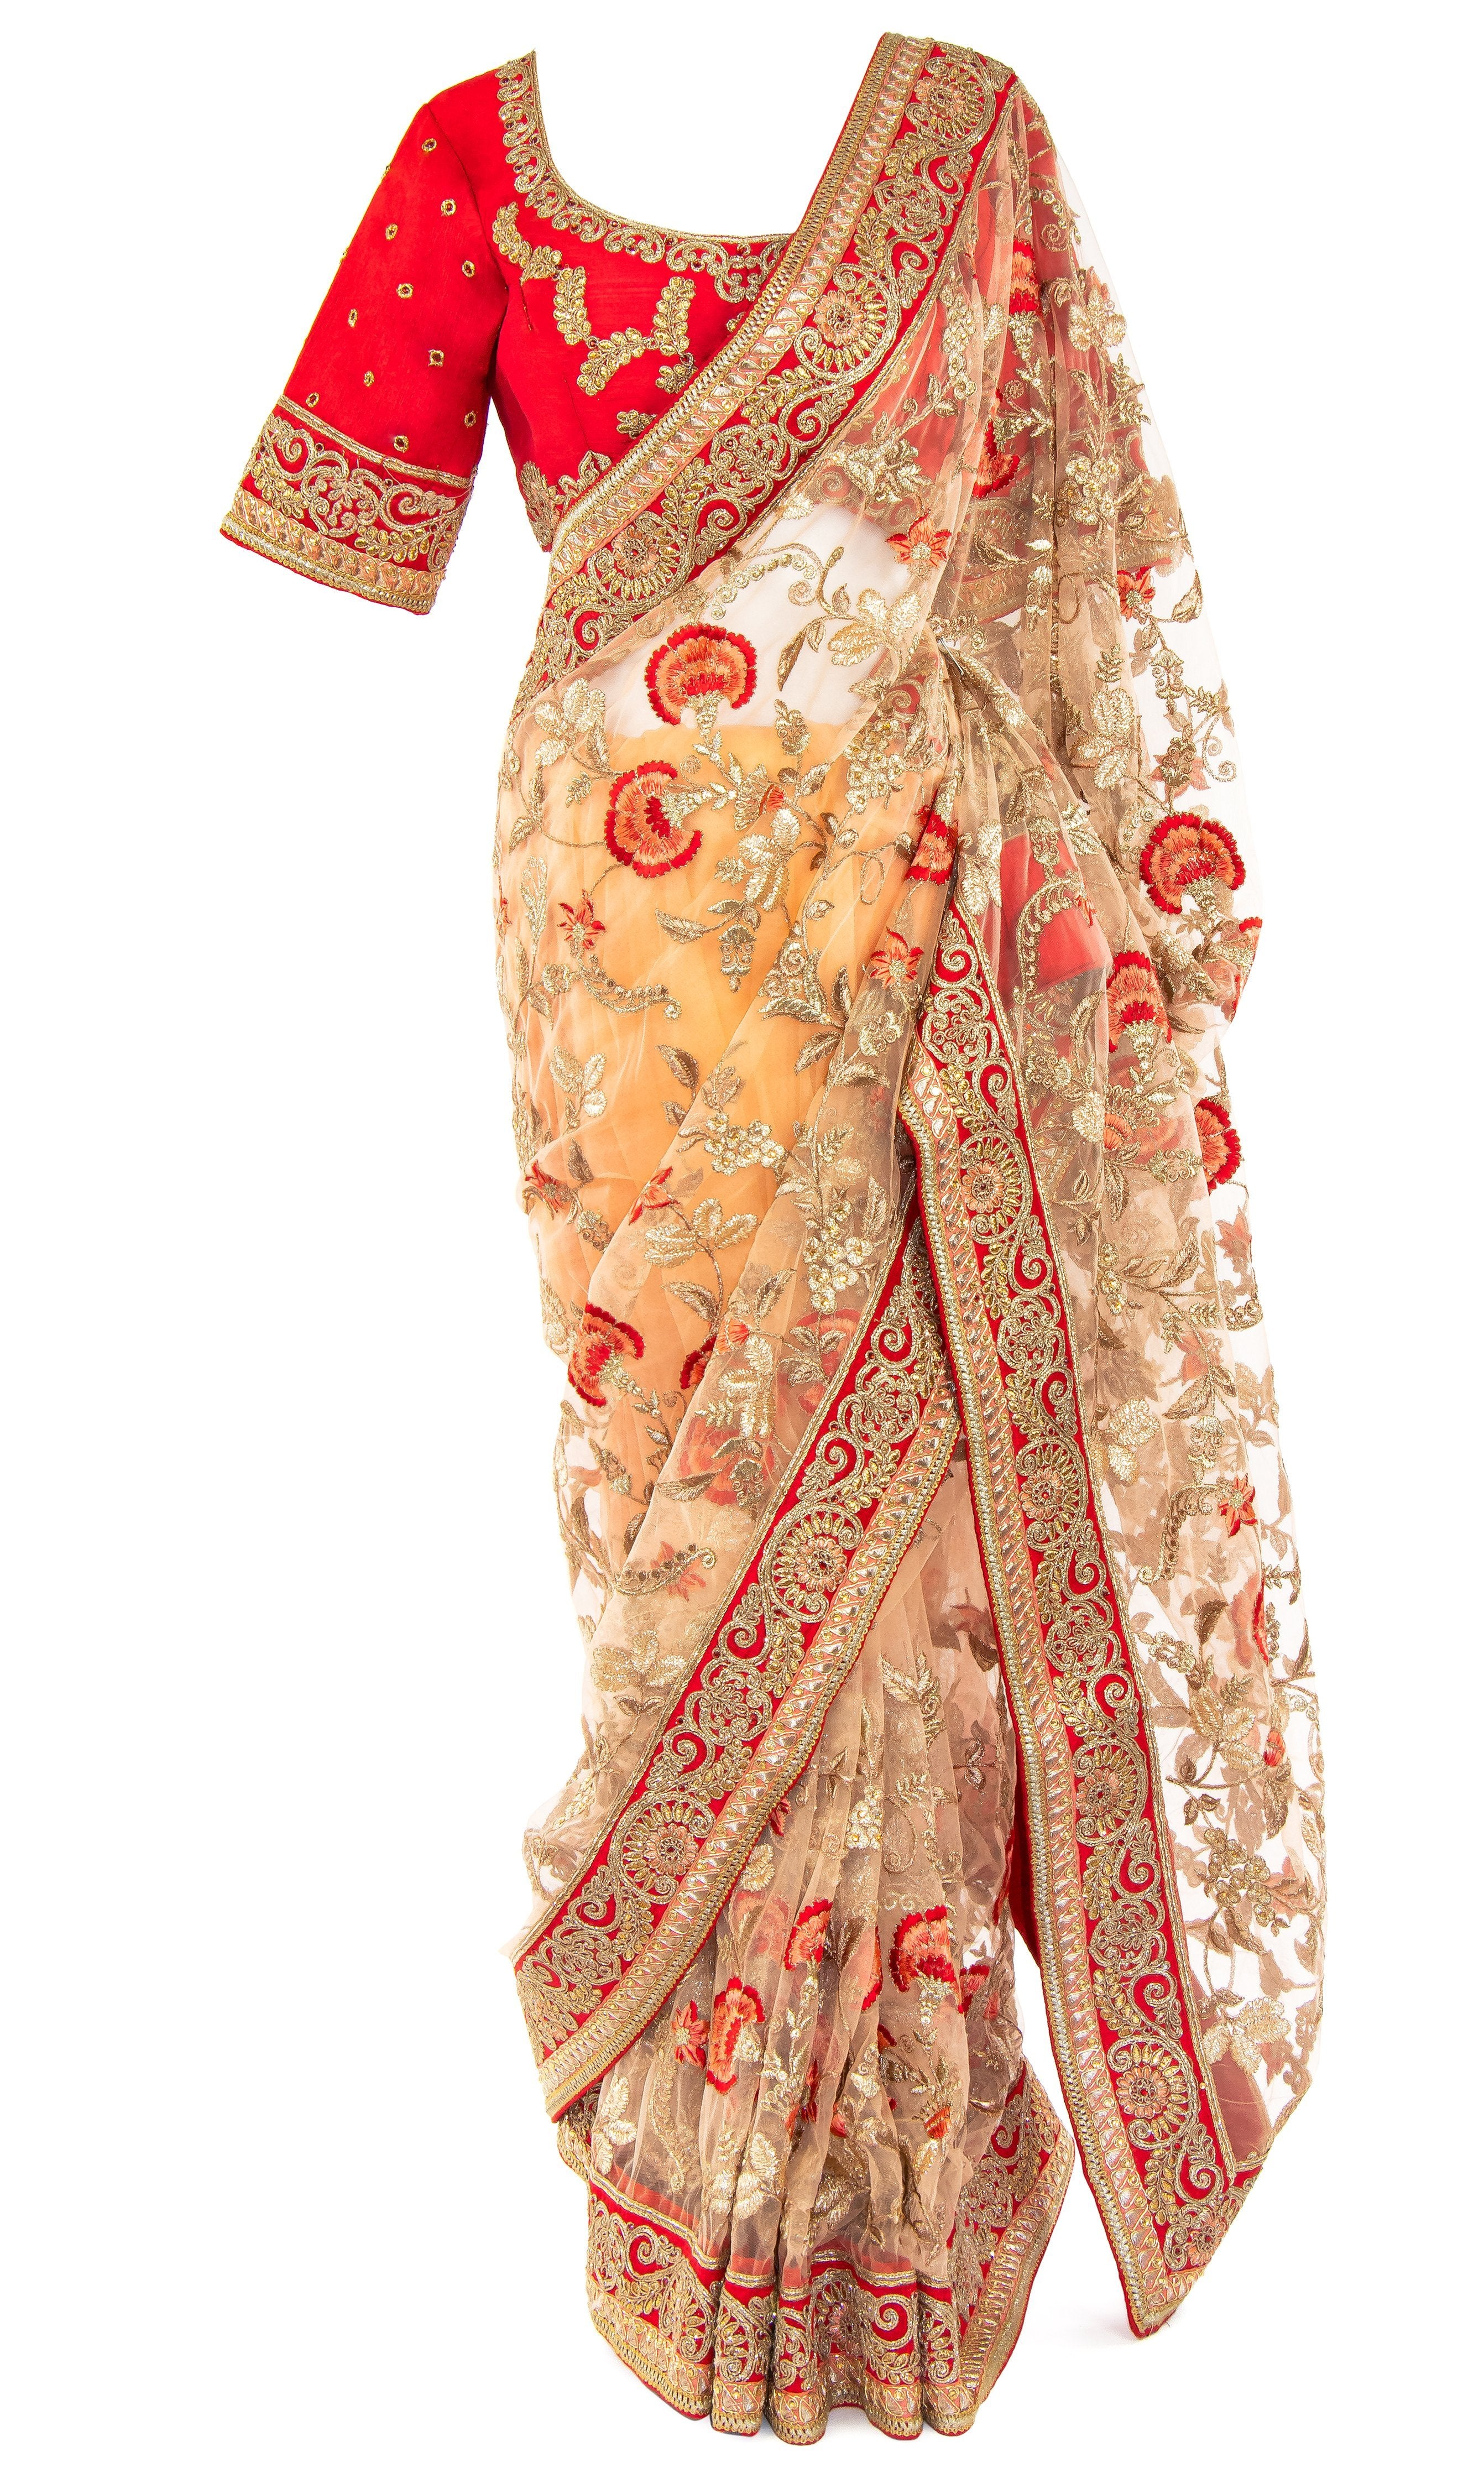 Peach net Saree detailed with a stunning red and gold floral pattern with Matching petticoat & red silk blouse